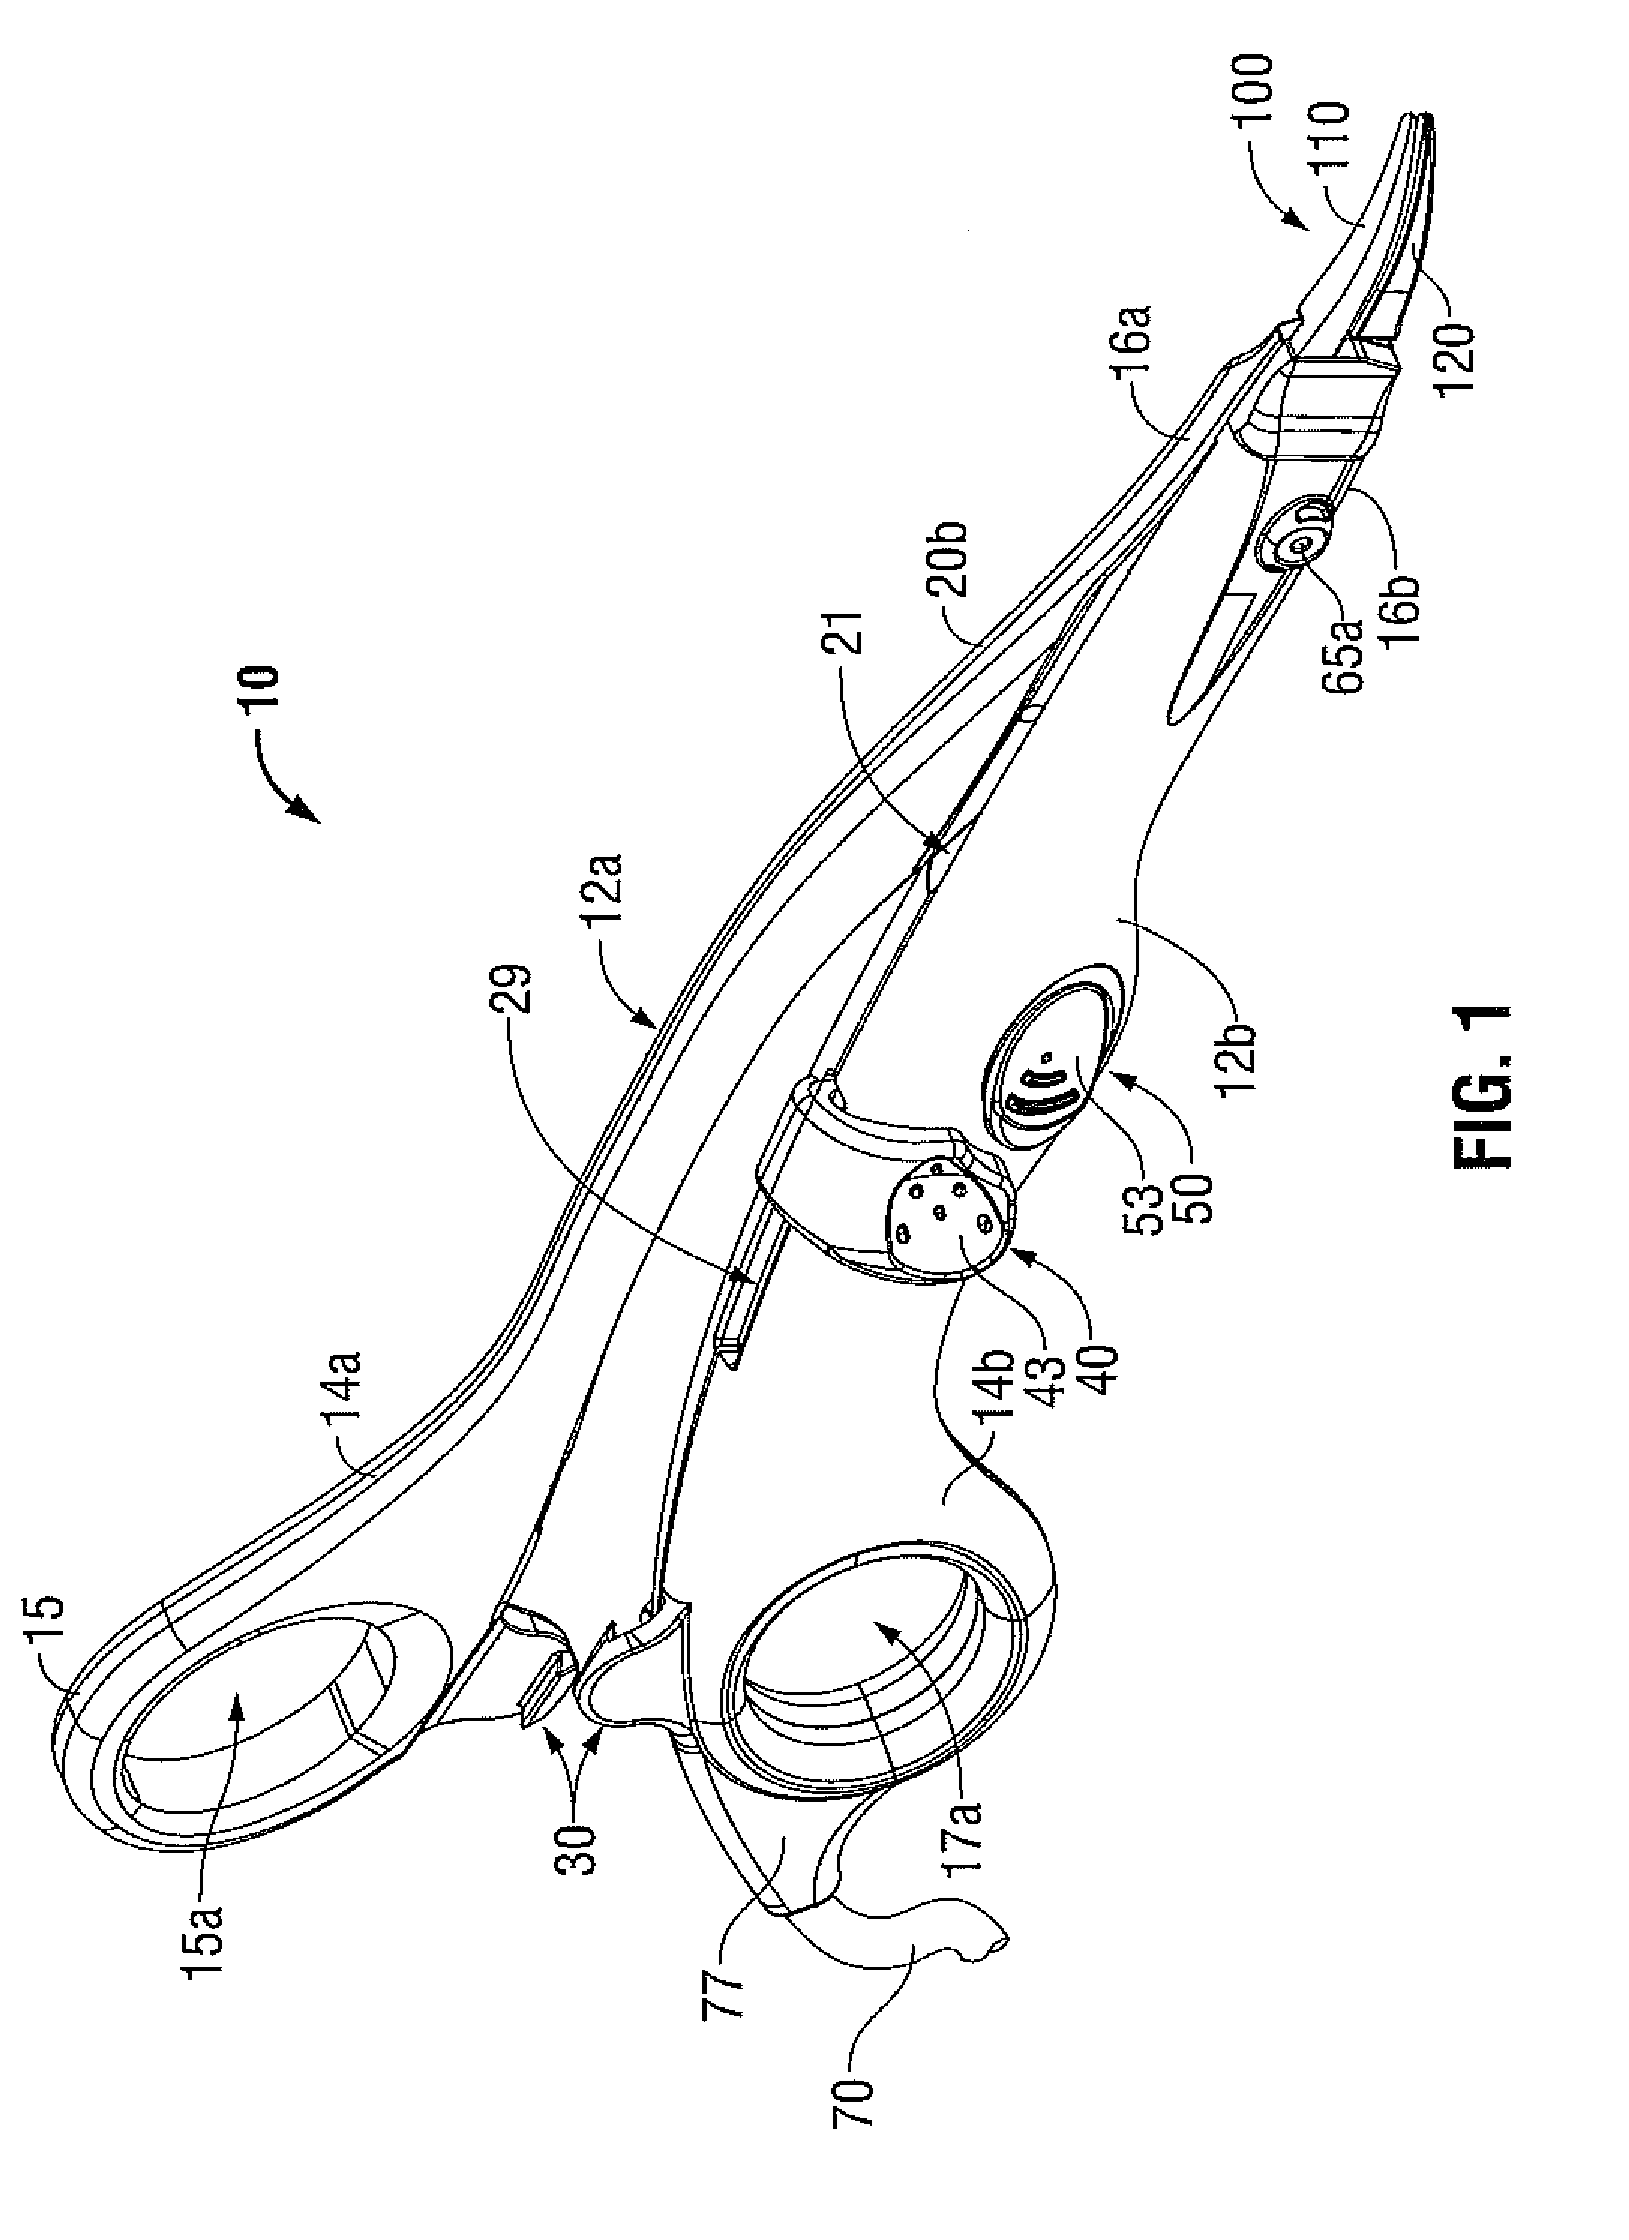 Open Vessel Sealing Instrument with Pivot Assembly